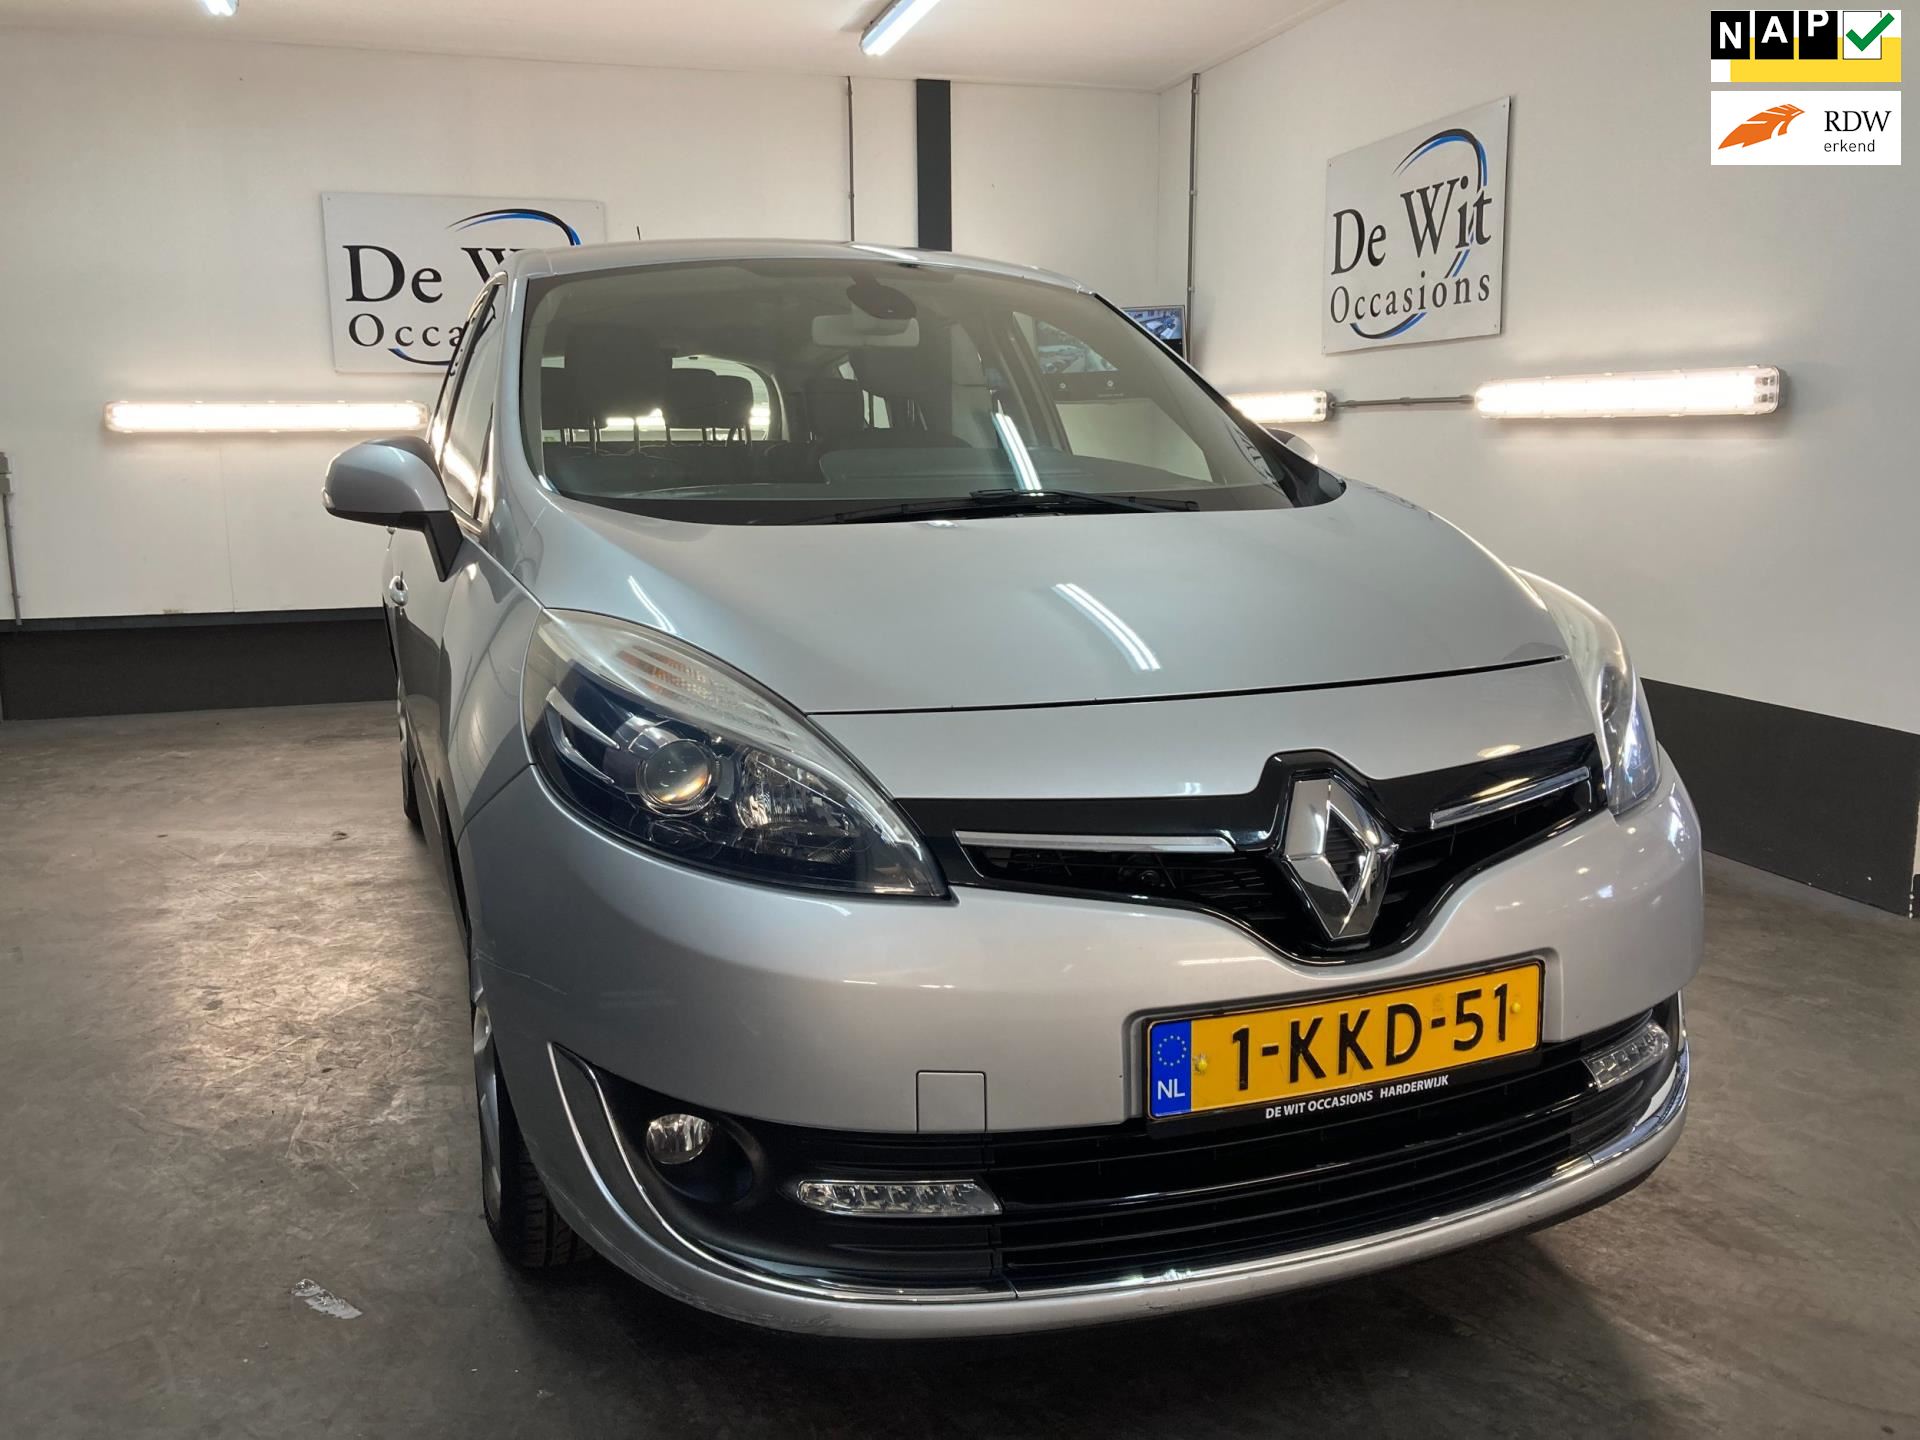 Renault Grand Scénic occasion - De Wit Occasions